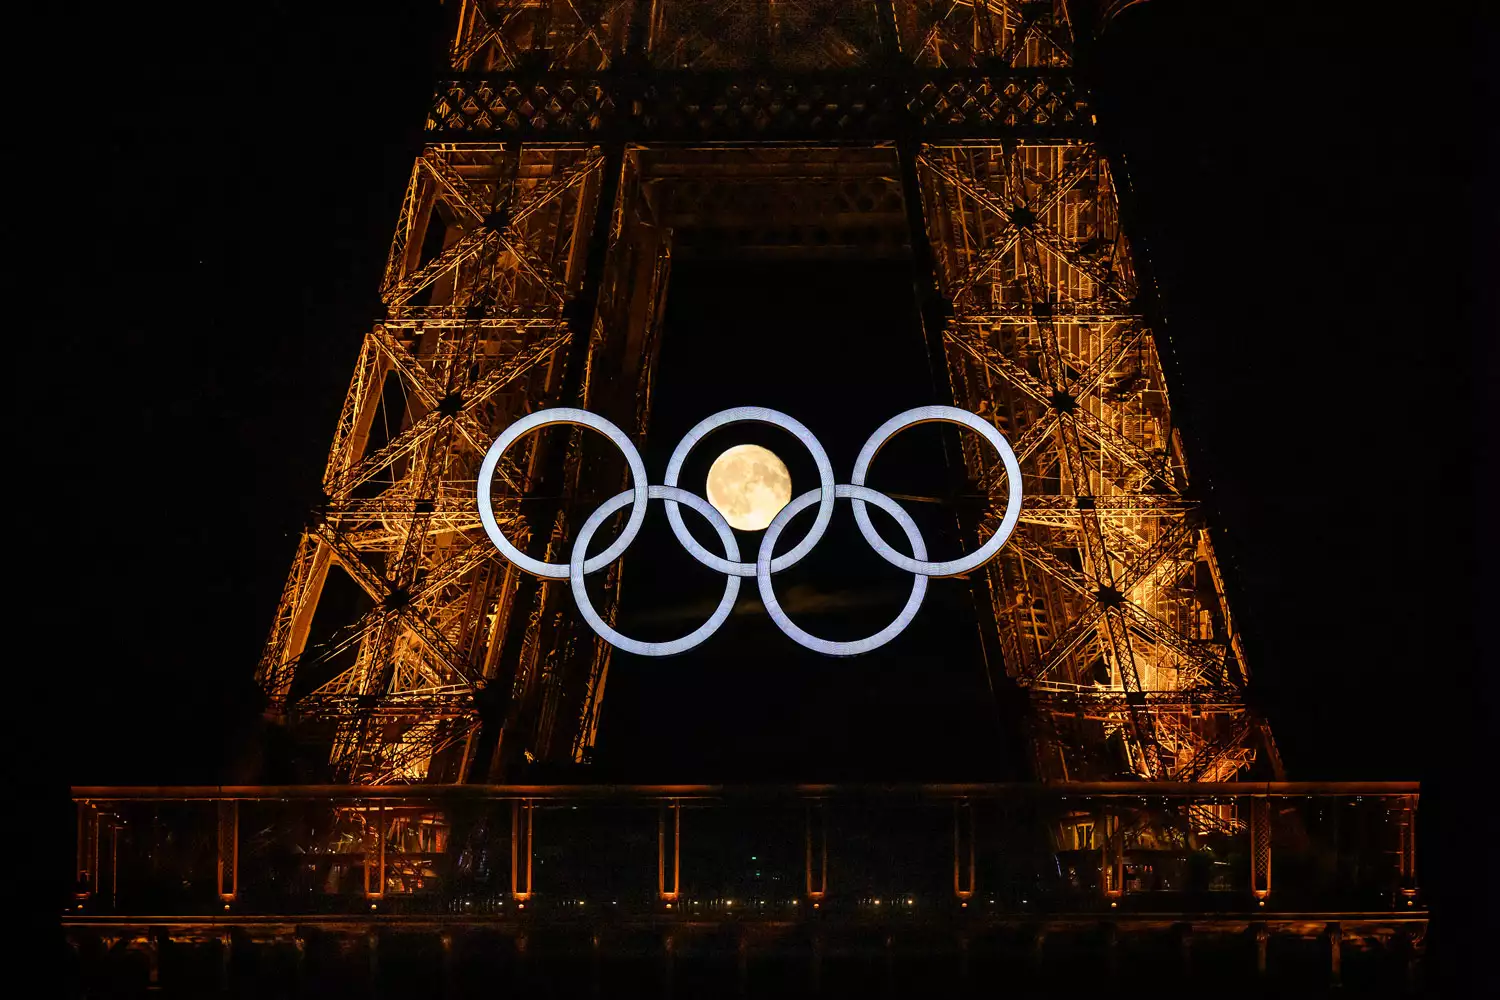 Dead on target: The rising moon “photobombed” the logo of the Paris Olympics